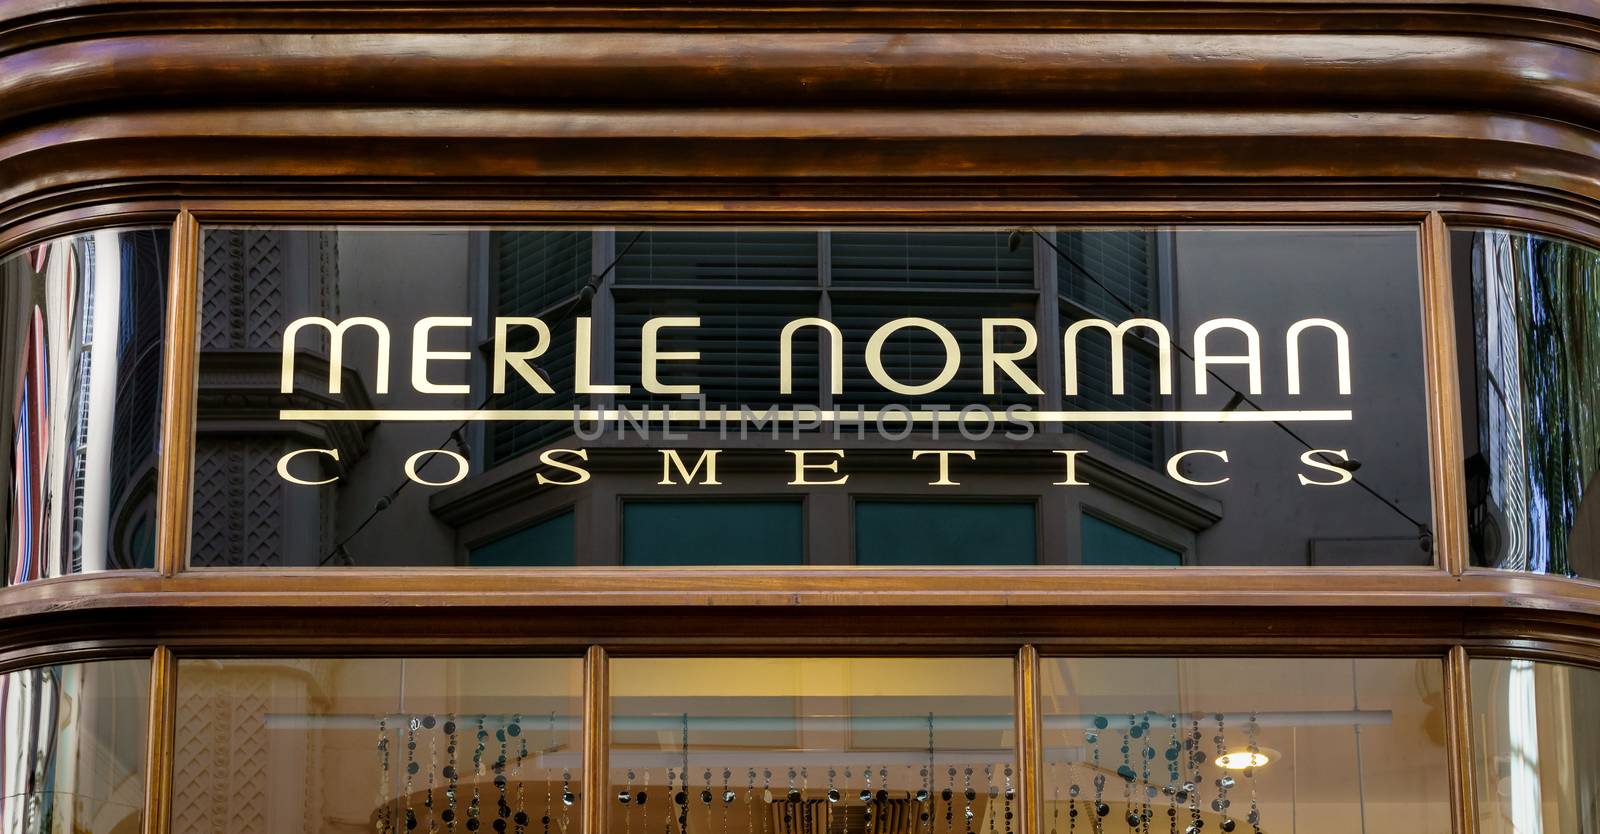 PASADEDNA, CA/USA - NOVEMBER 22, 2015: Merle Norman exterior and logo. Merle Norman Cosmetics is a manufacturer of cosmetics products.